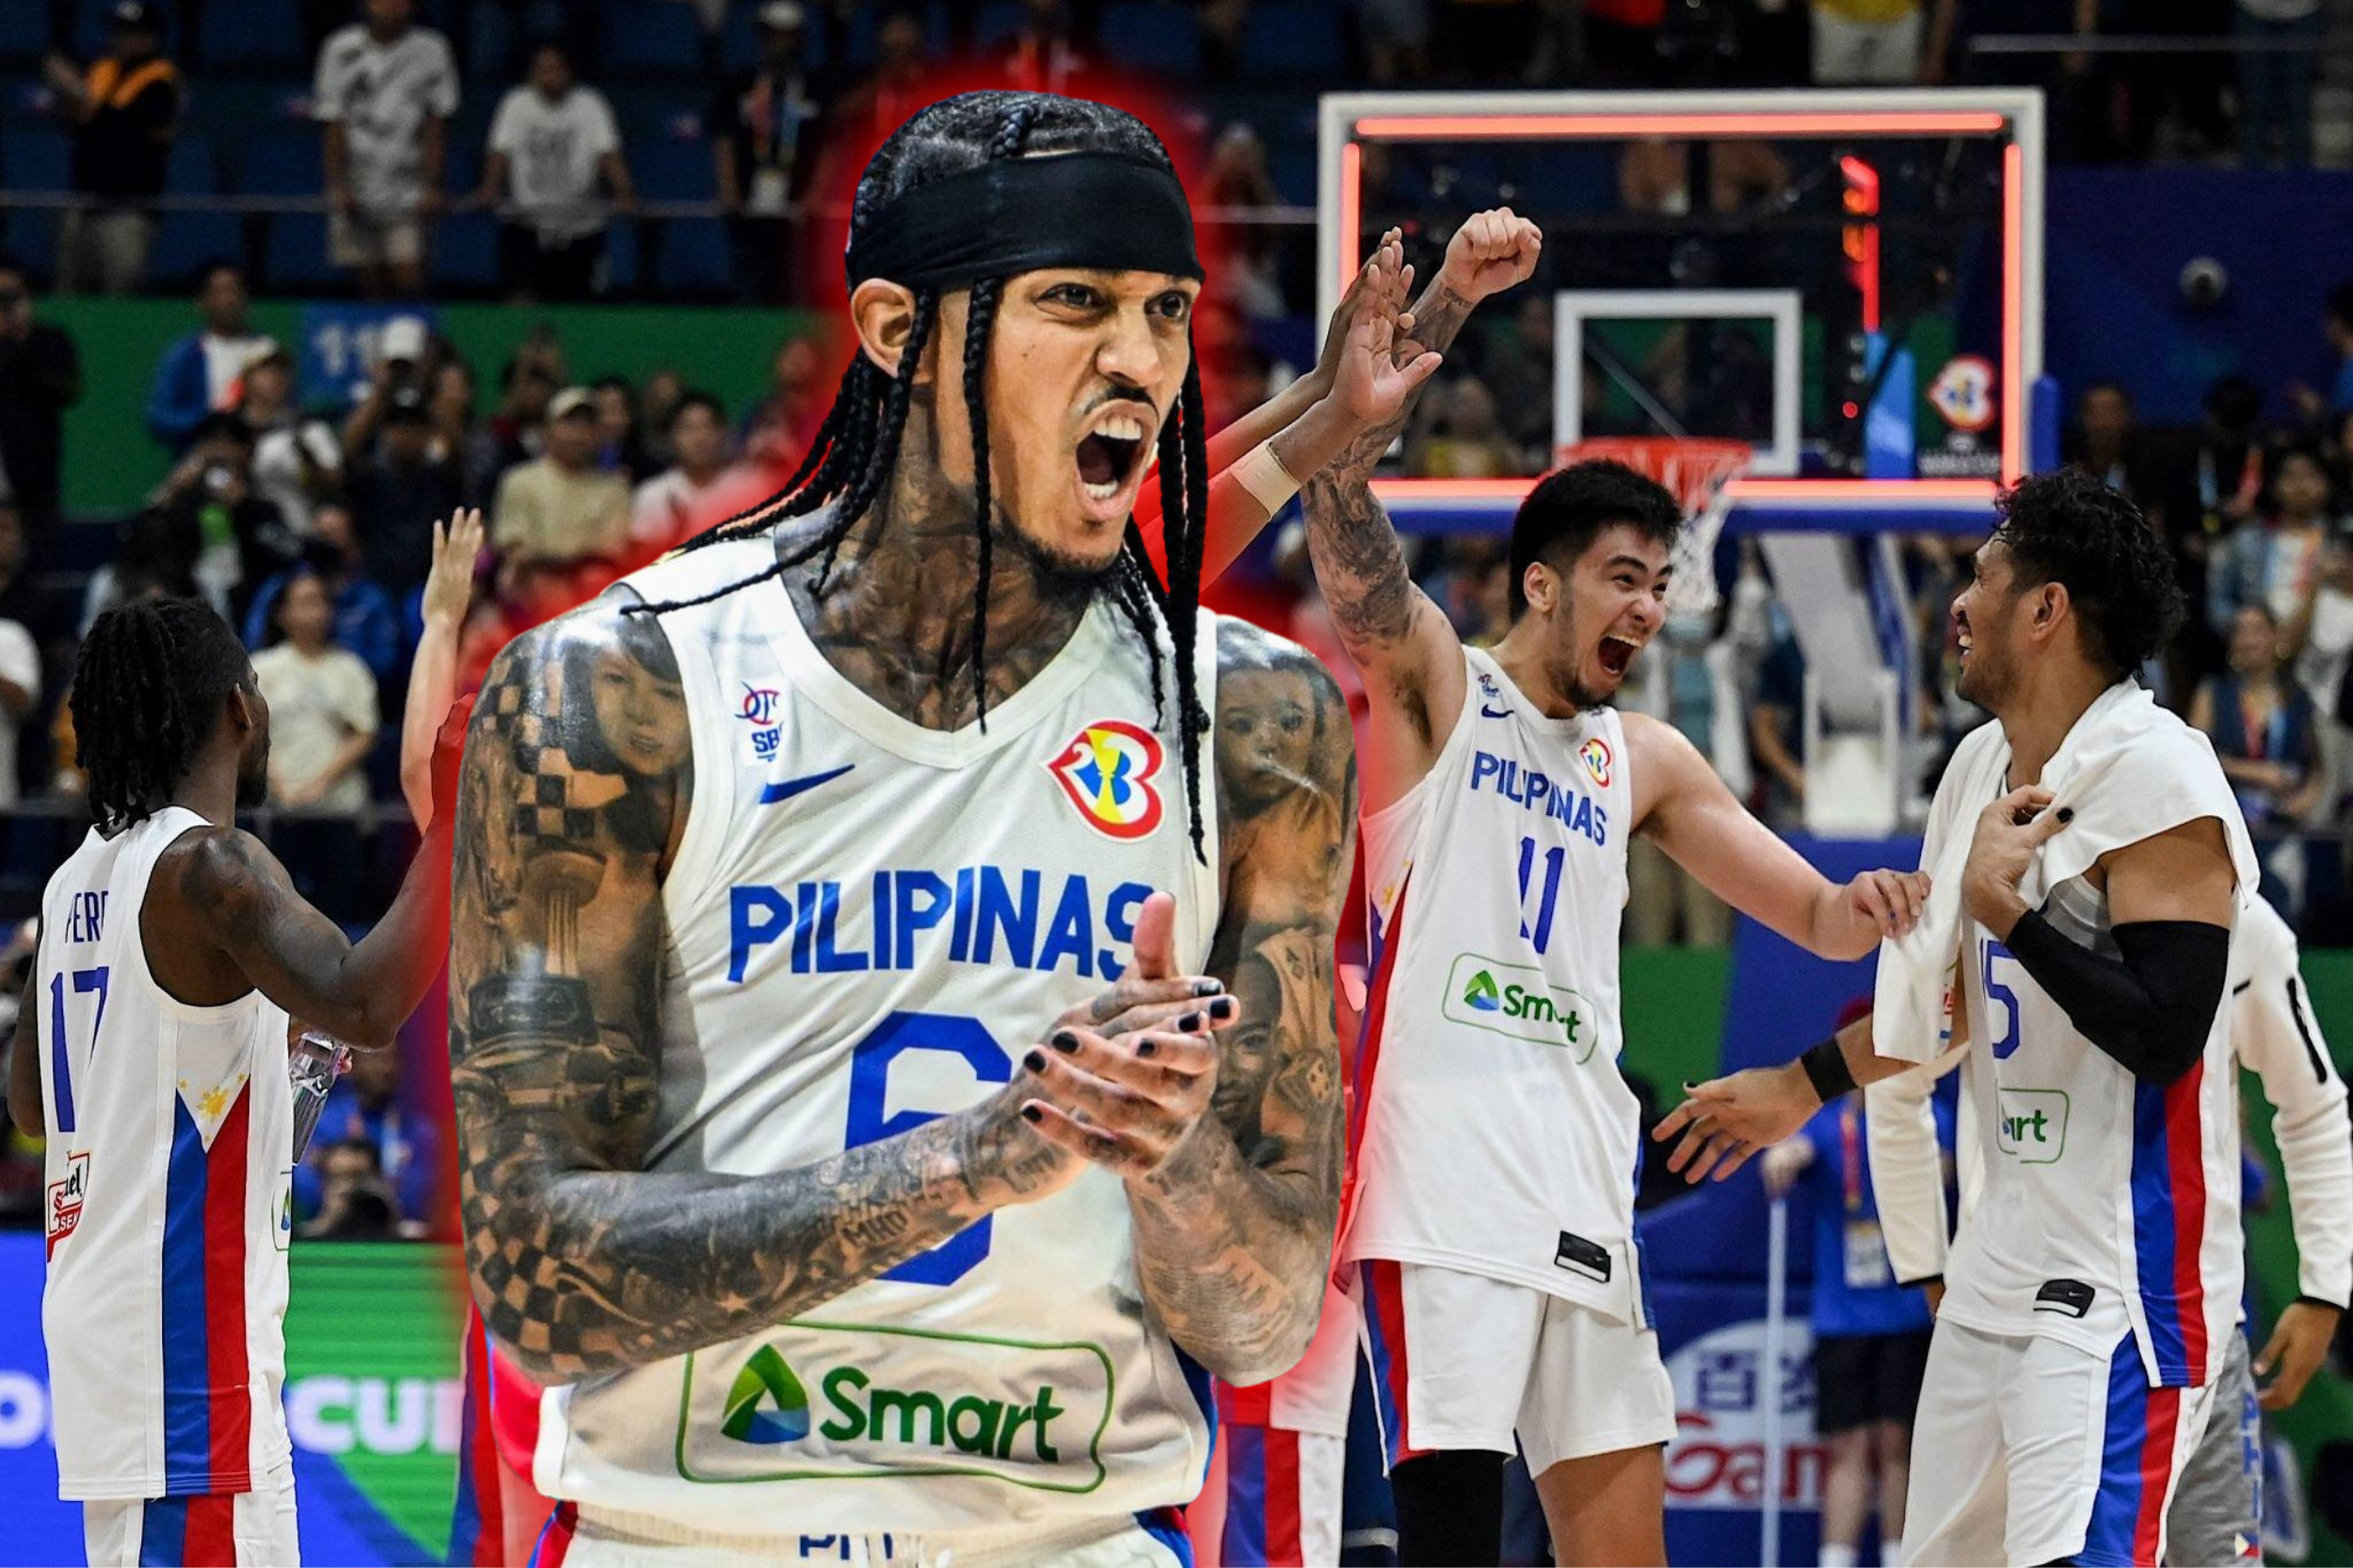 Philippines' Jordan Clarkson reacts during the FIBA Basketball World Cup classification match between China and Philippines at Smart Araneta Coliseum in Quezon City on September 2, 2023. (Photo by SHERWIN VARDELEON / AFP) (Photo by SHERWIN VARDELEON/AFP via Getty Images) Team Philippines celebrate after winning during the FIBA Basketball World Cup match between Philippines and China at Smart Araneta Coliseum in Quezon City on September 2, 2023. (Photo by JAM STA ROSA / AFP) (Photo by JAM STA ROSA/AFP via Getty Images)